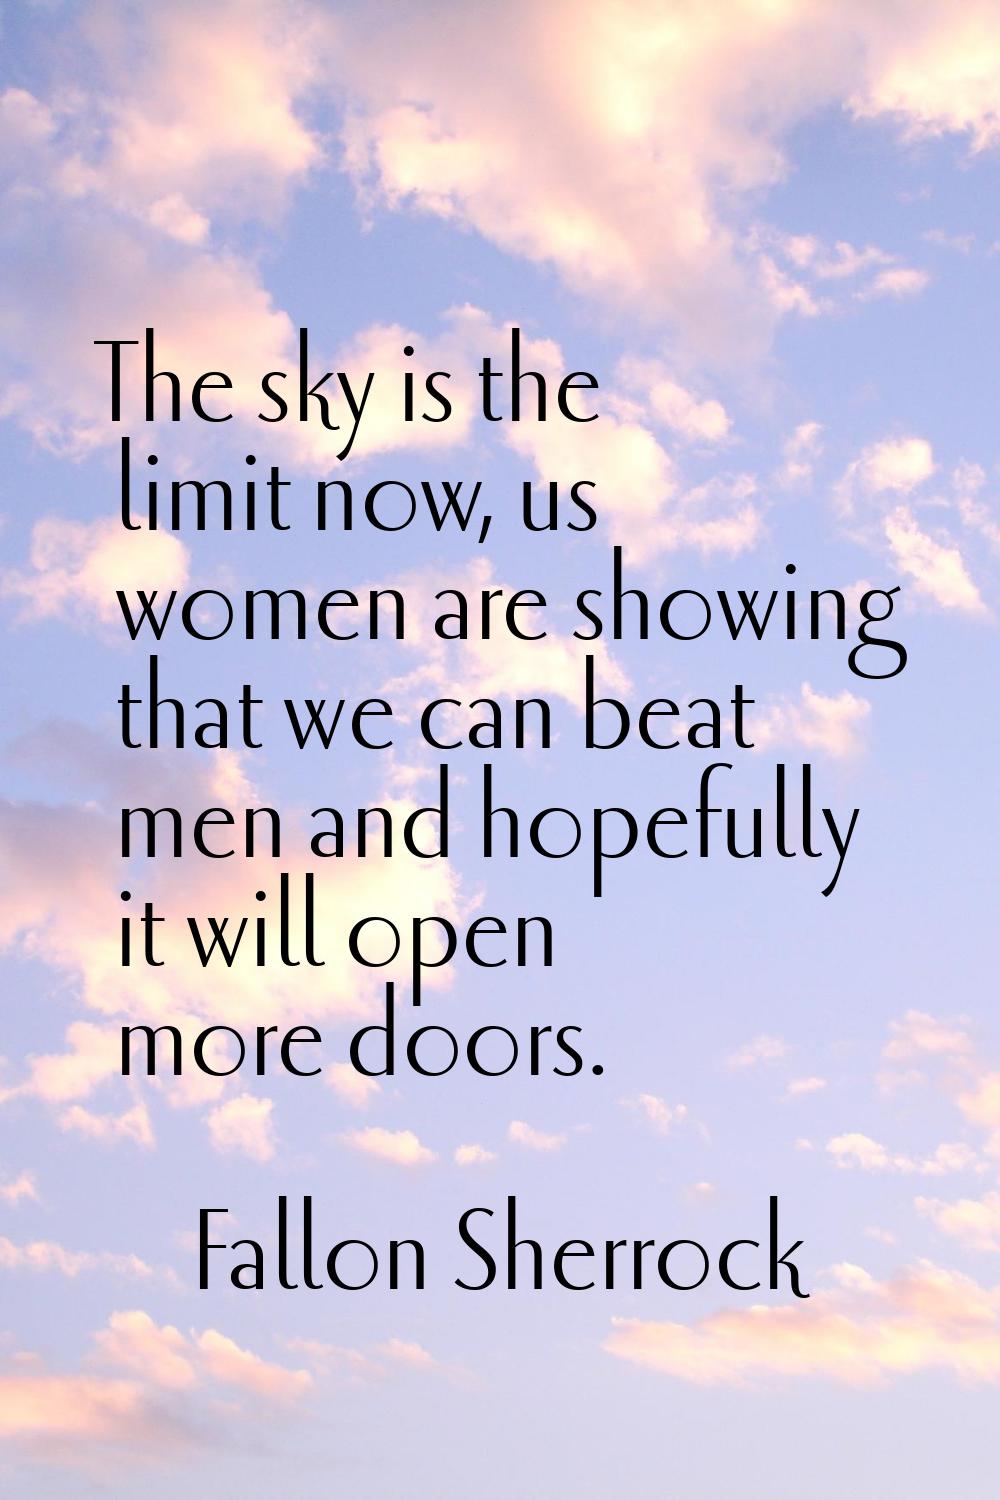 The sky is the limit now, us women are showing that we can beat men and hopefully it will open more